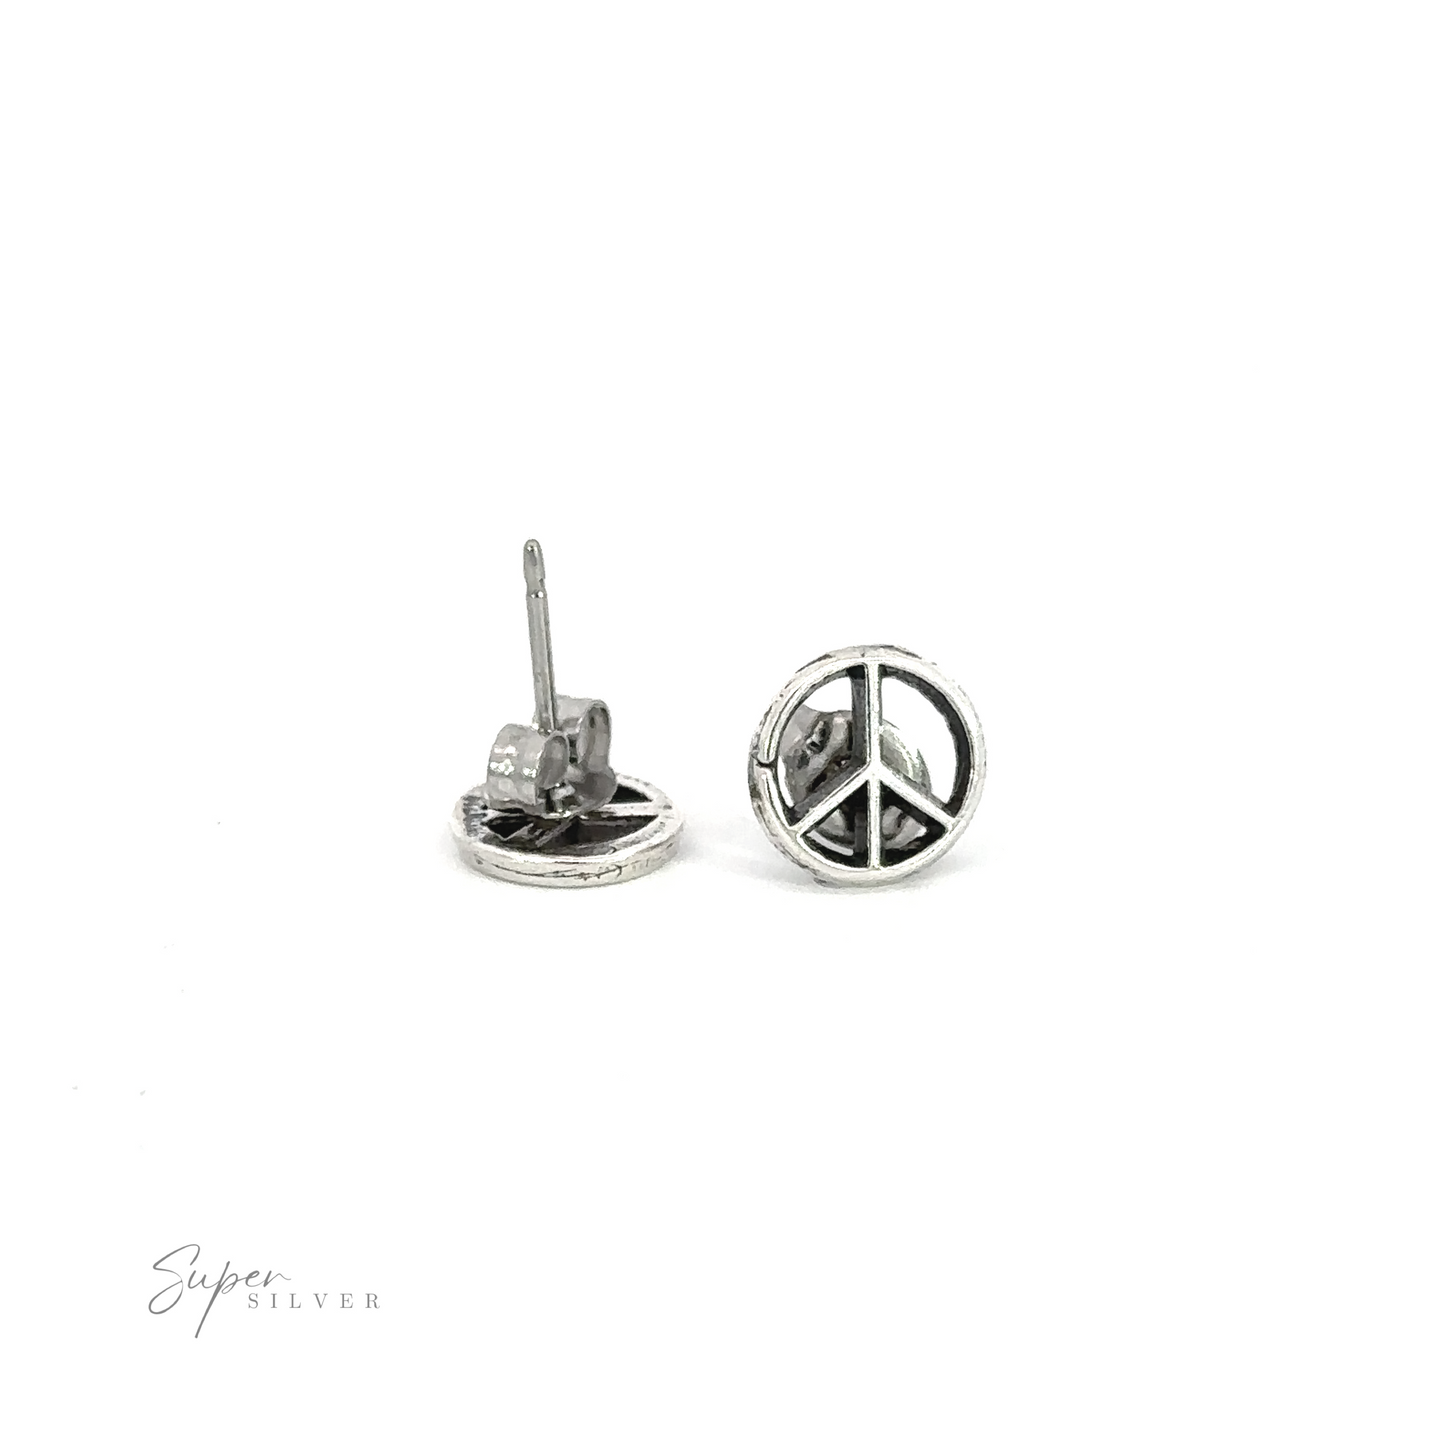 A pair of Peace Sign Studs on a tranquil white background.